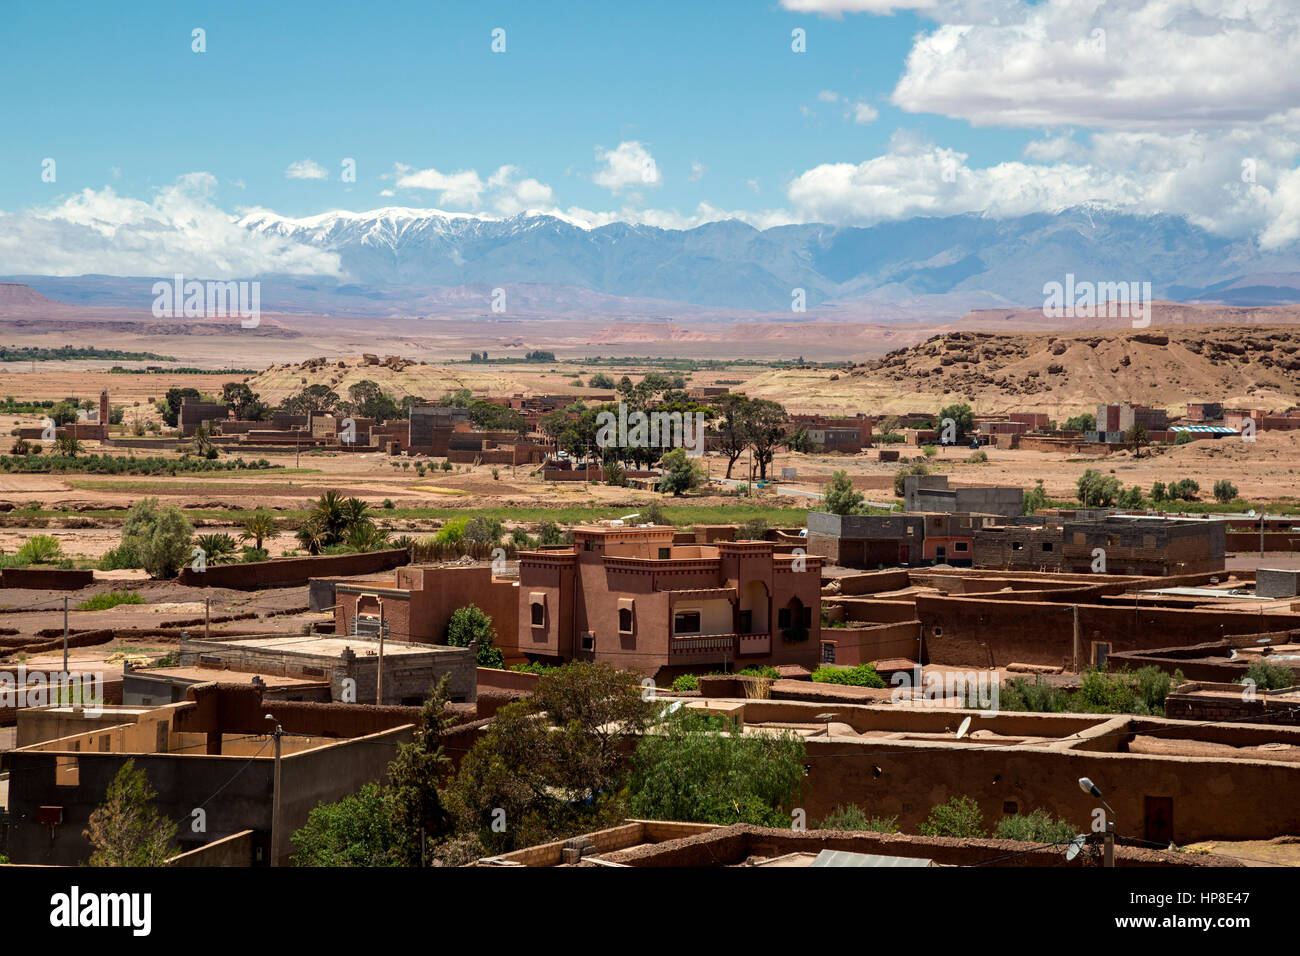 Atlas Mountains, Morocco.  Snow on Mountains in May, Village in Foreground. Stock Photo